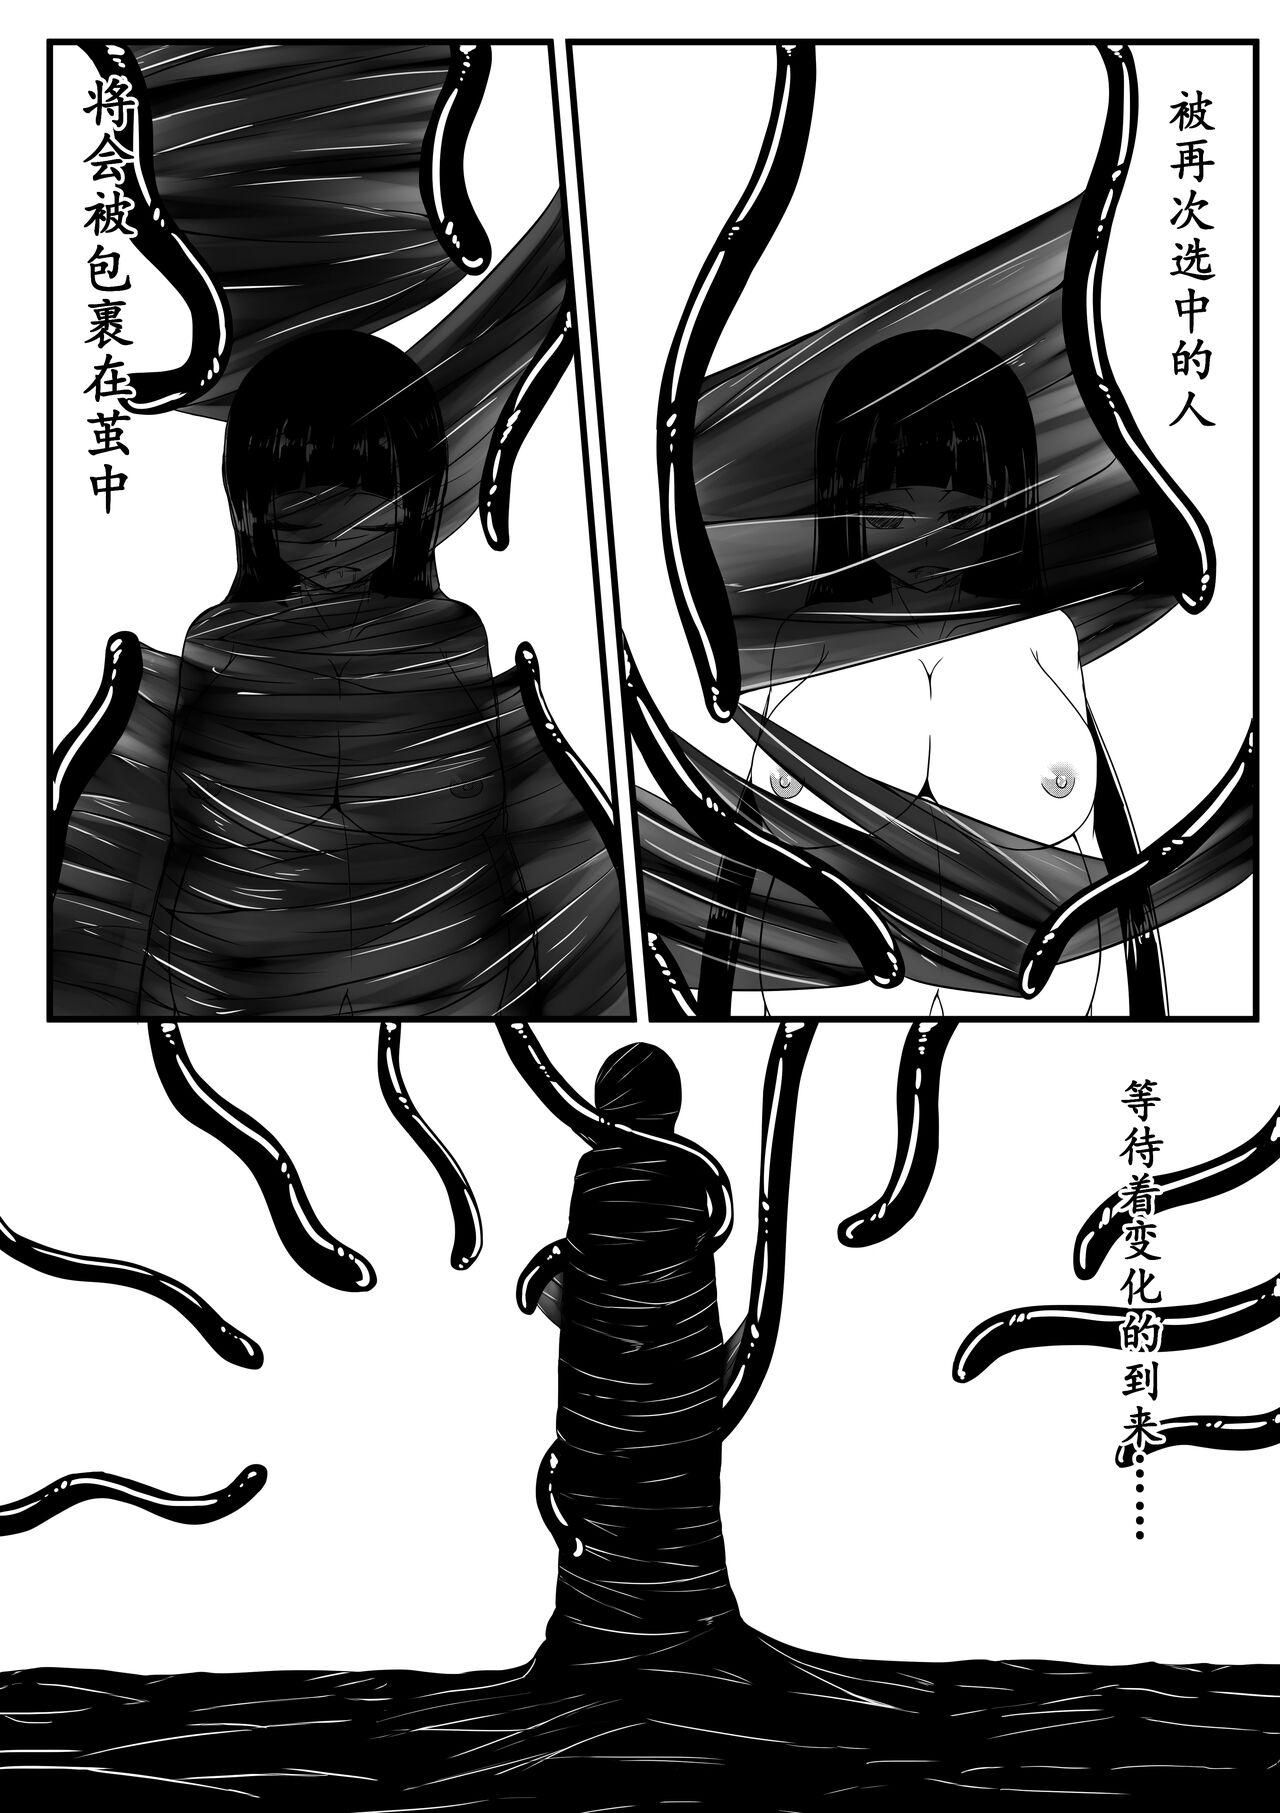 Oldvsyoung 天球的祭品 Old Man - Page 6